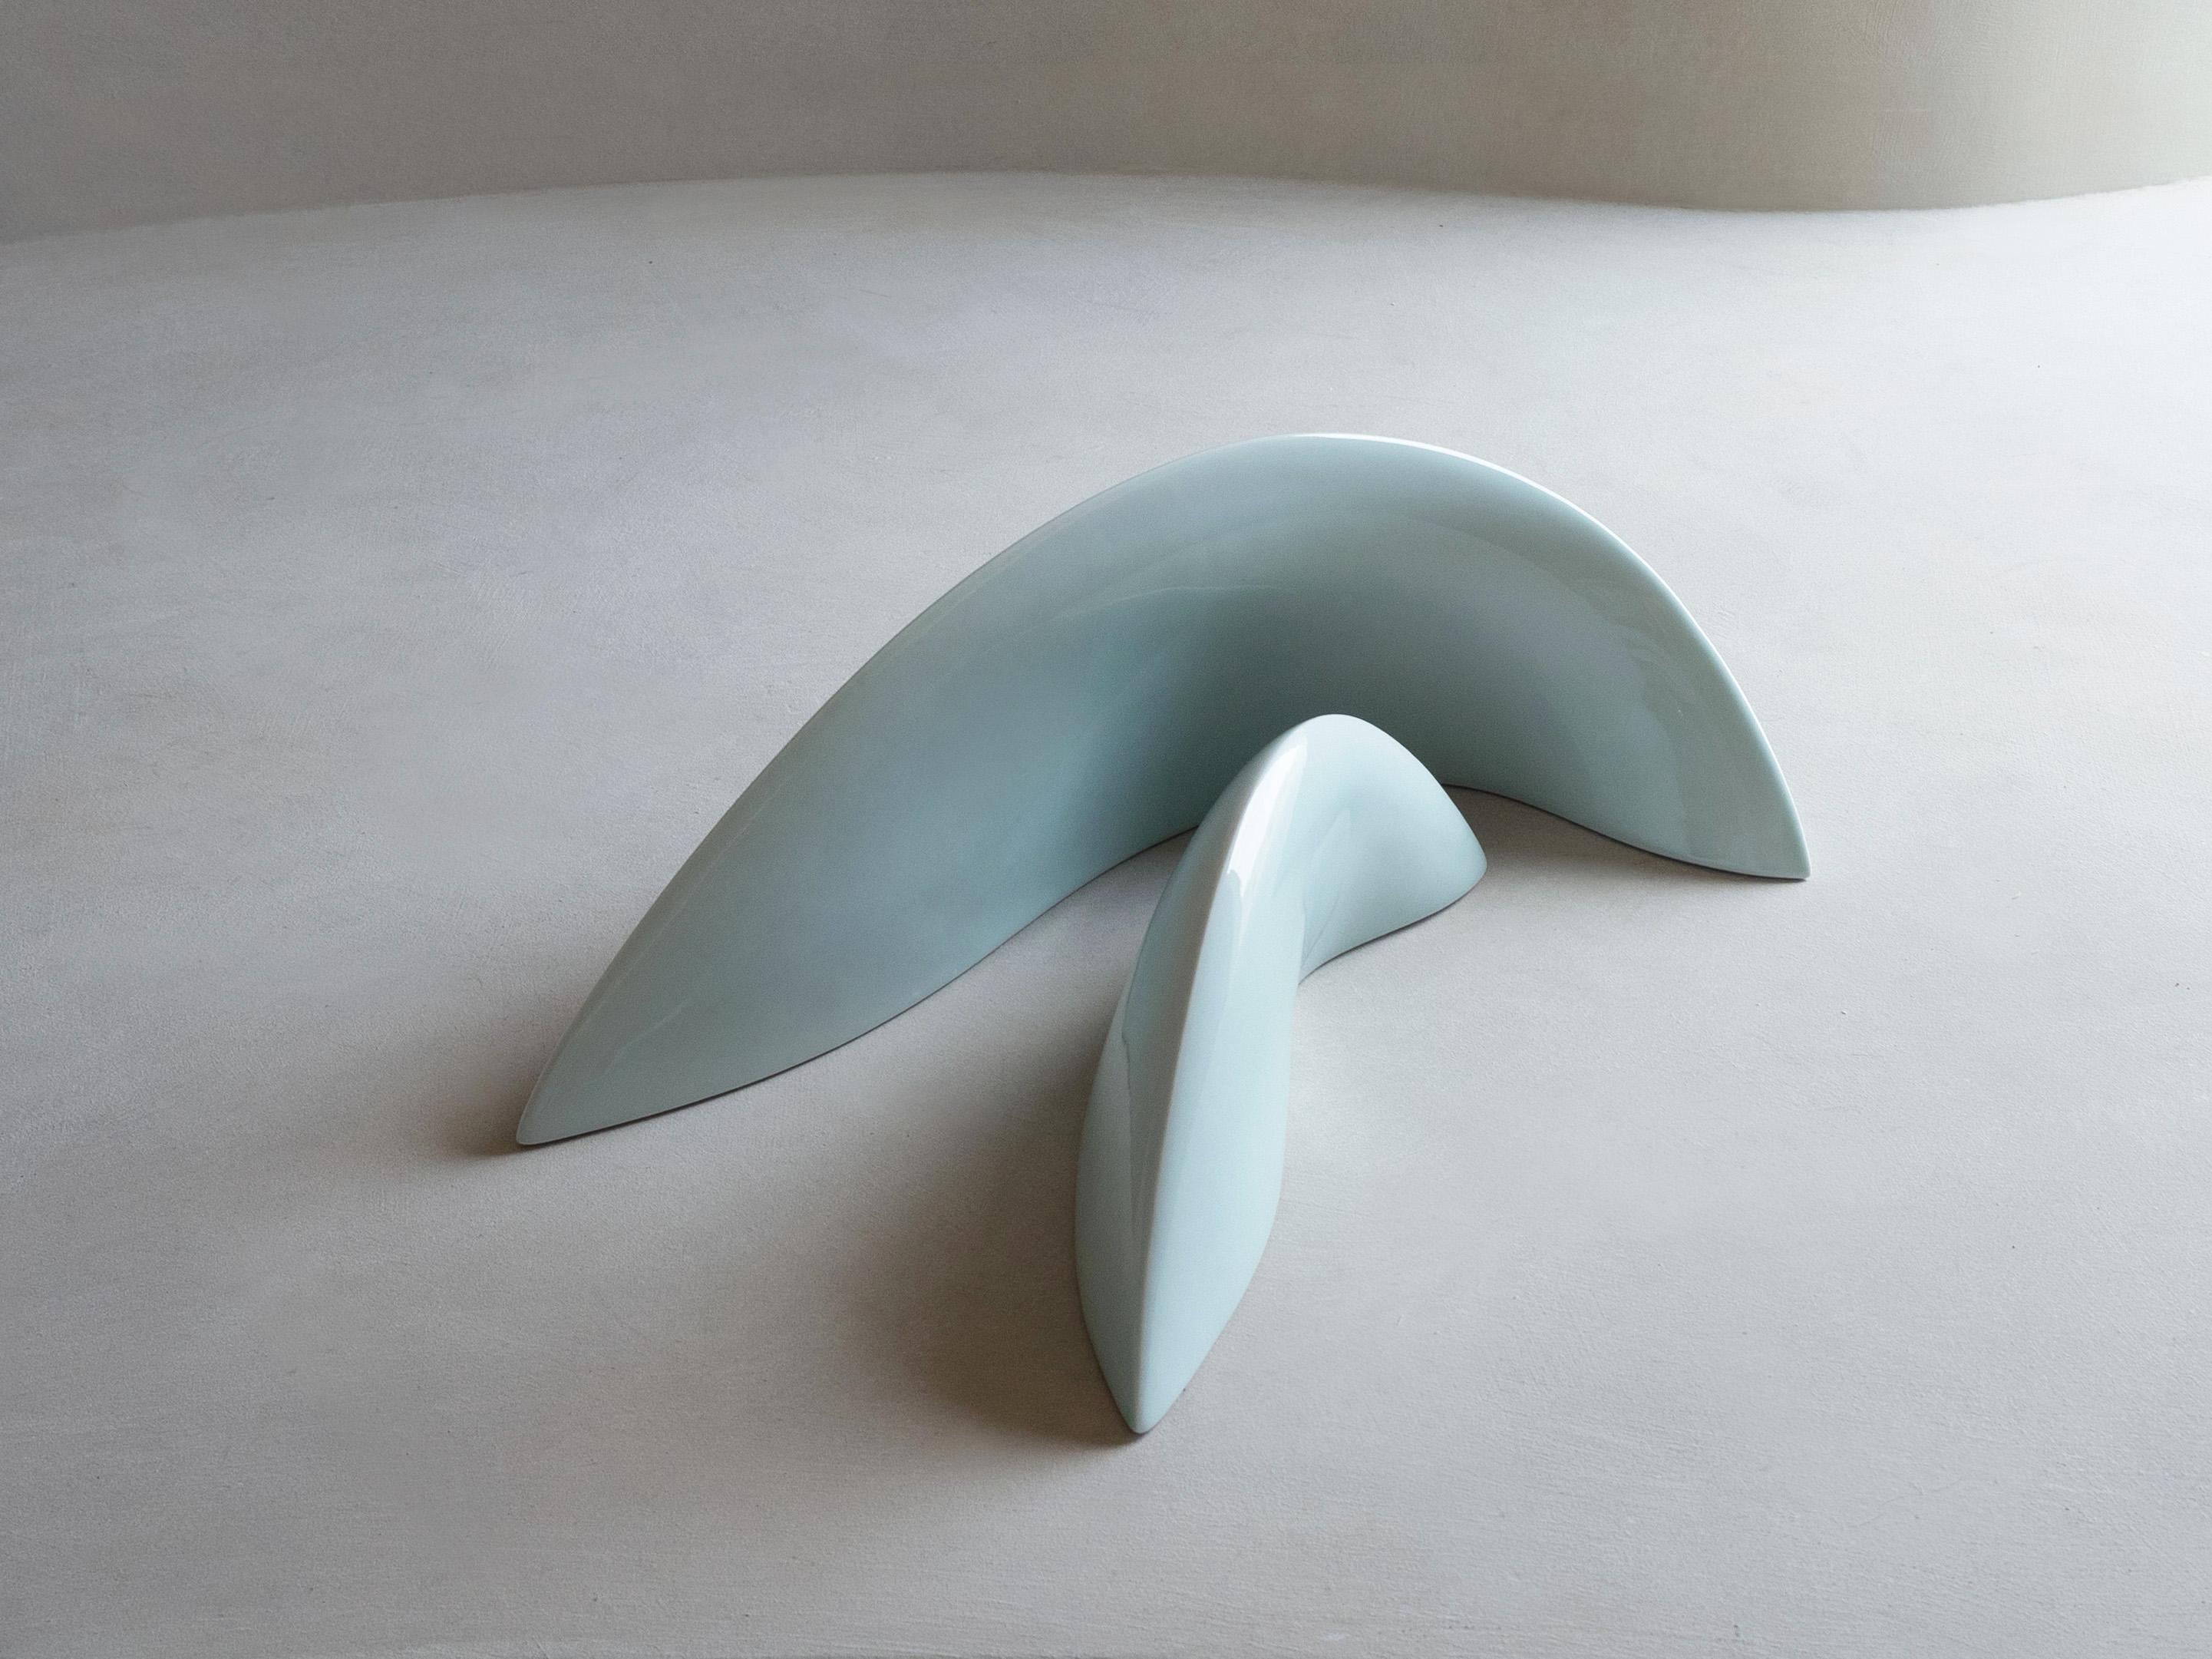 Cast Abstract Table Sculpture - Ceramic Celadon Sculpture Pair by Soo Joo For Sale